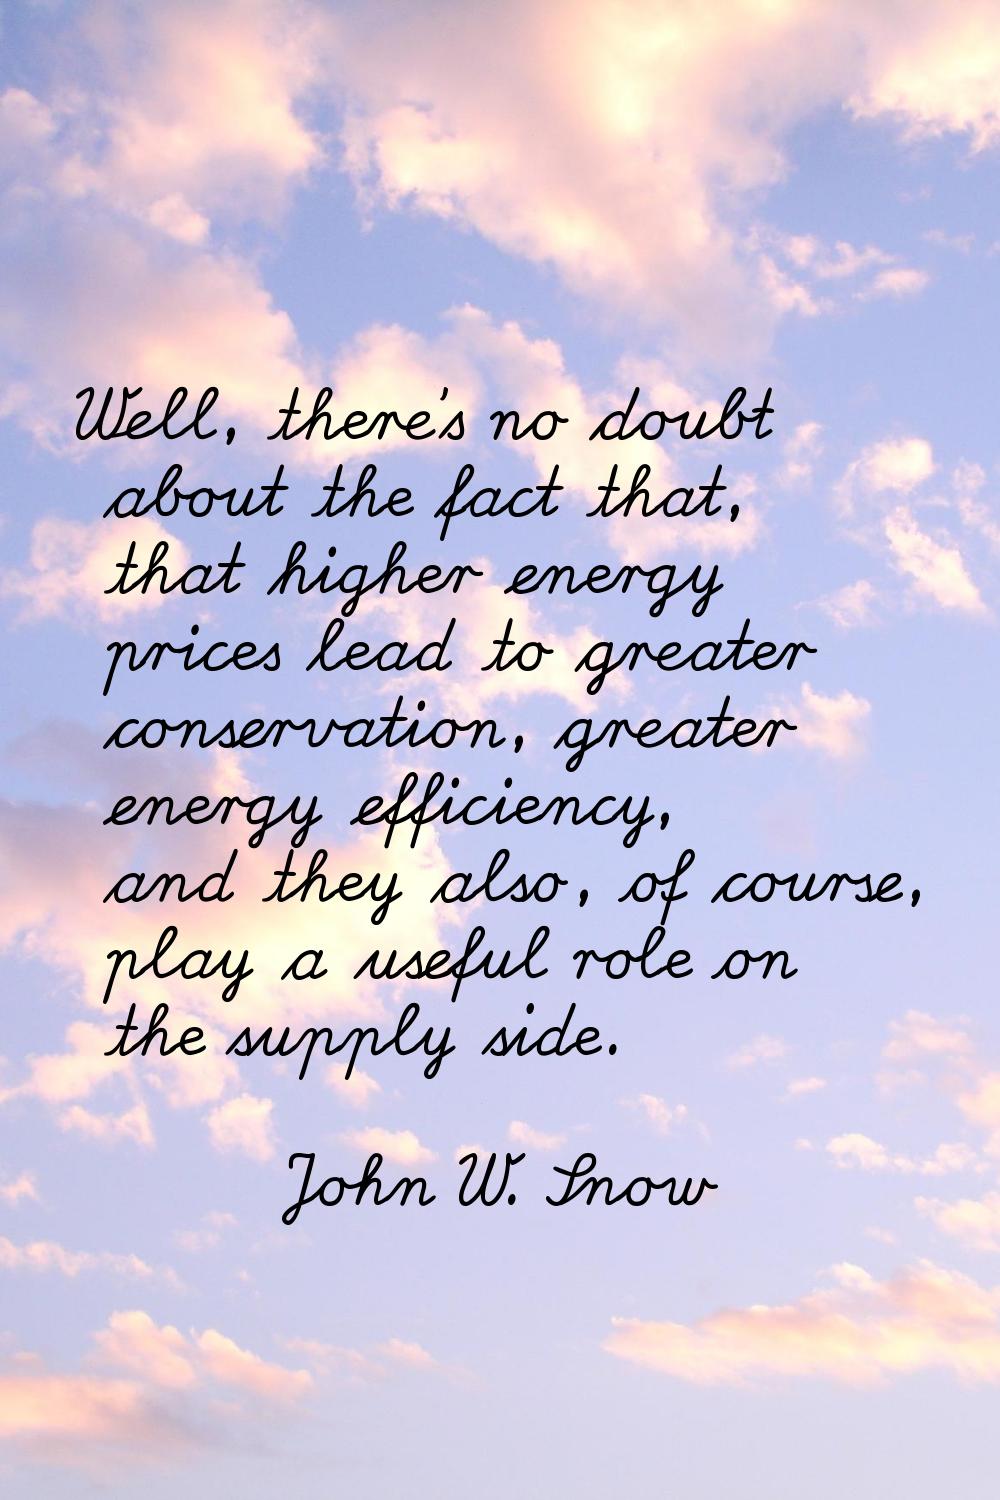 Well, there's no doubt about the fact that, that higher energy prices lead to greater conservation,